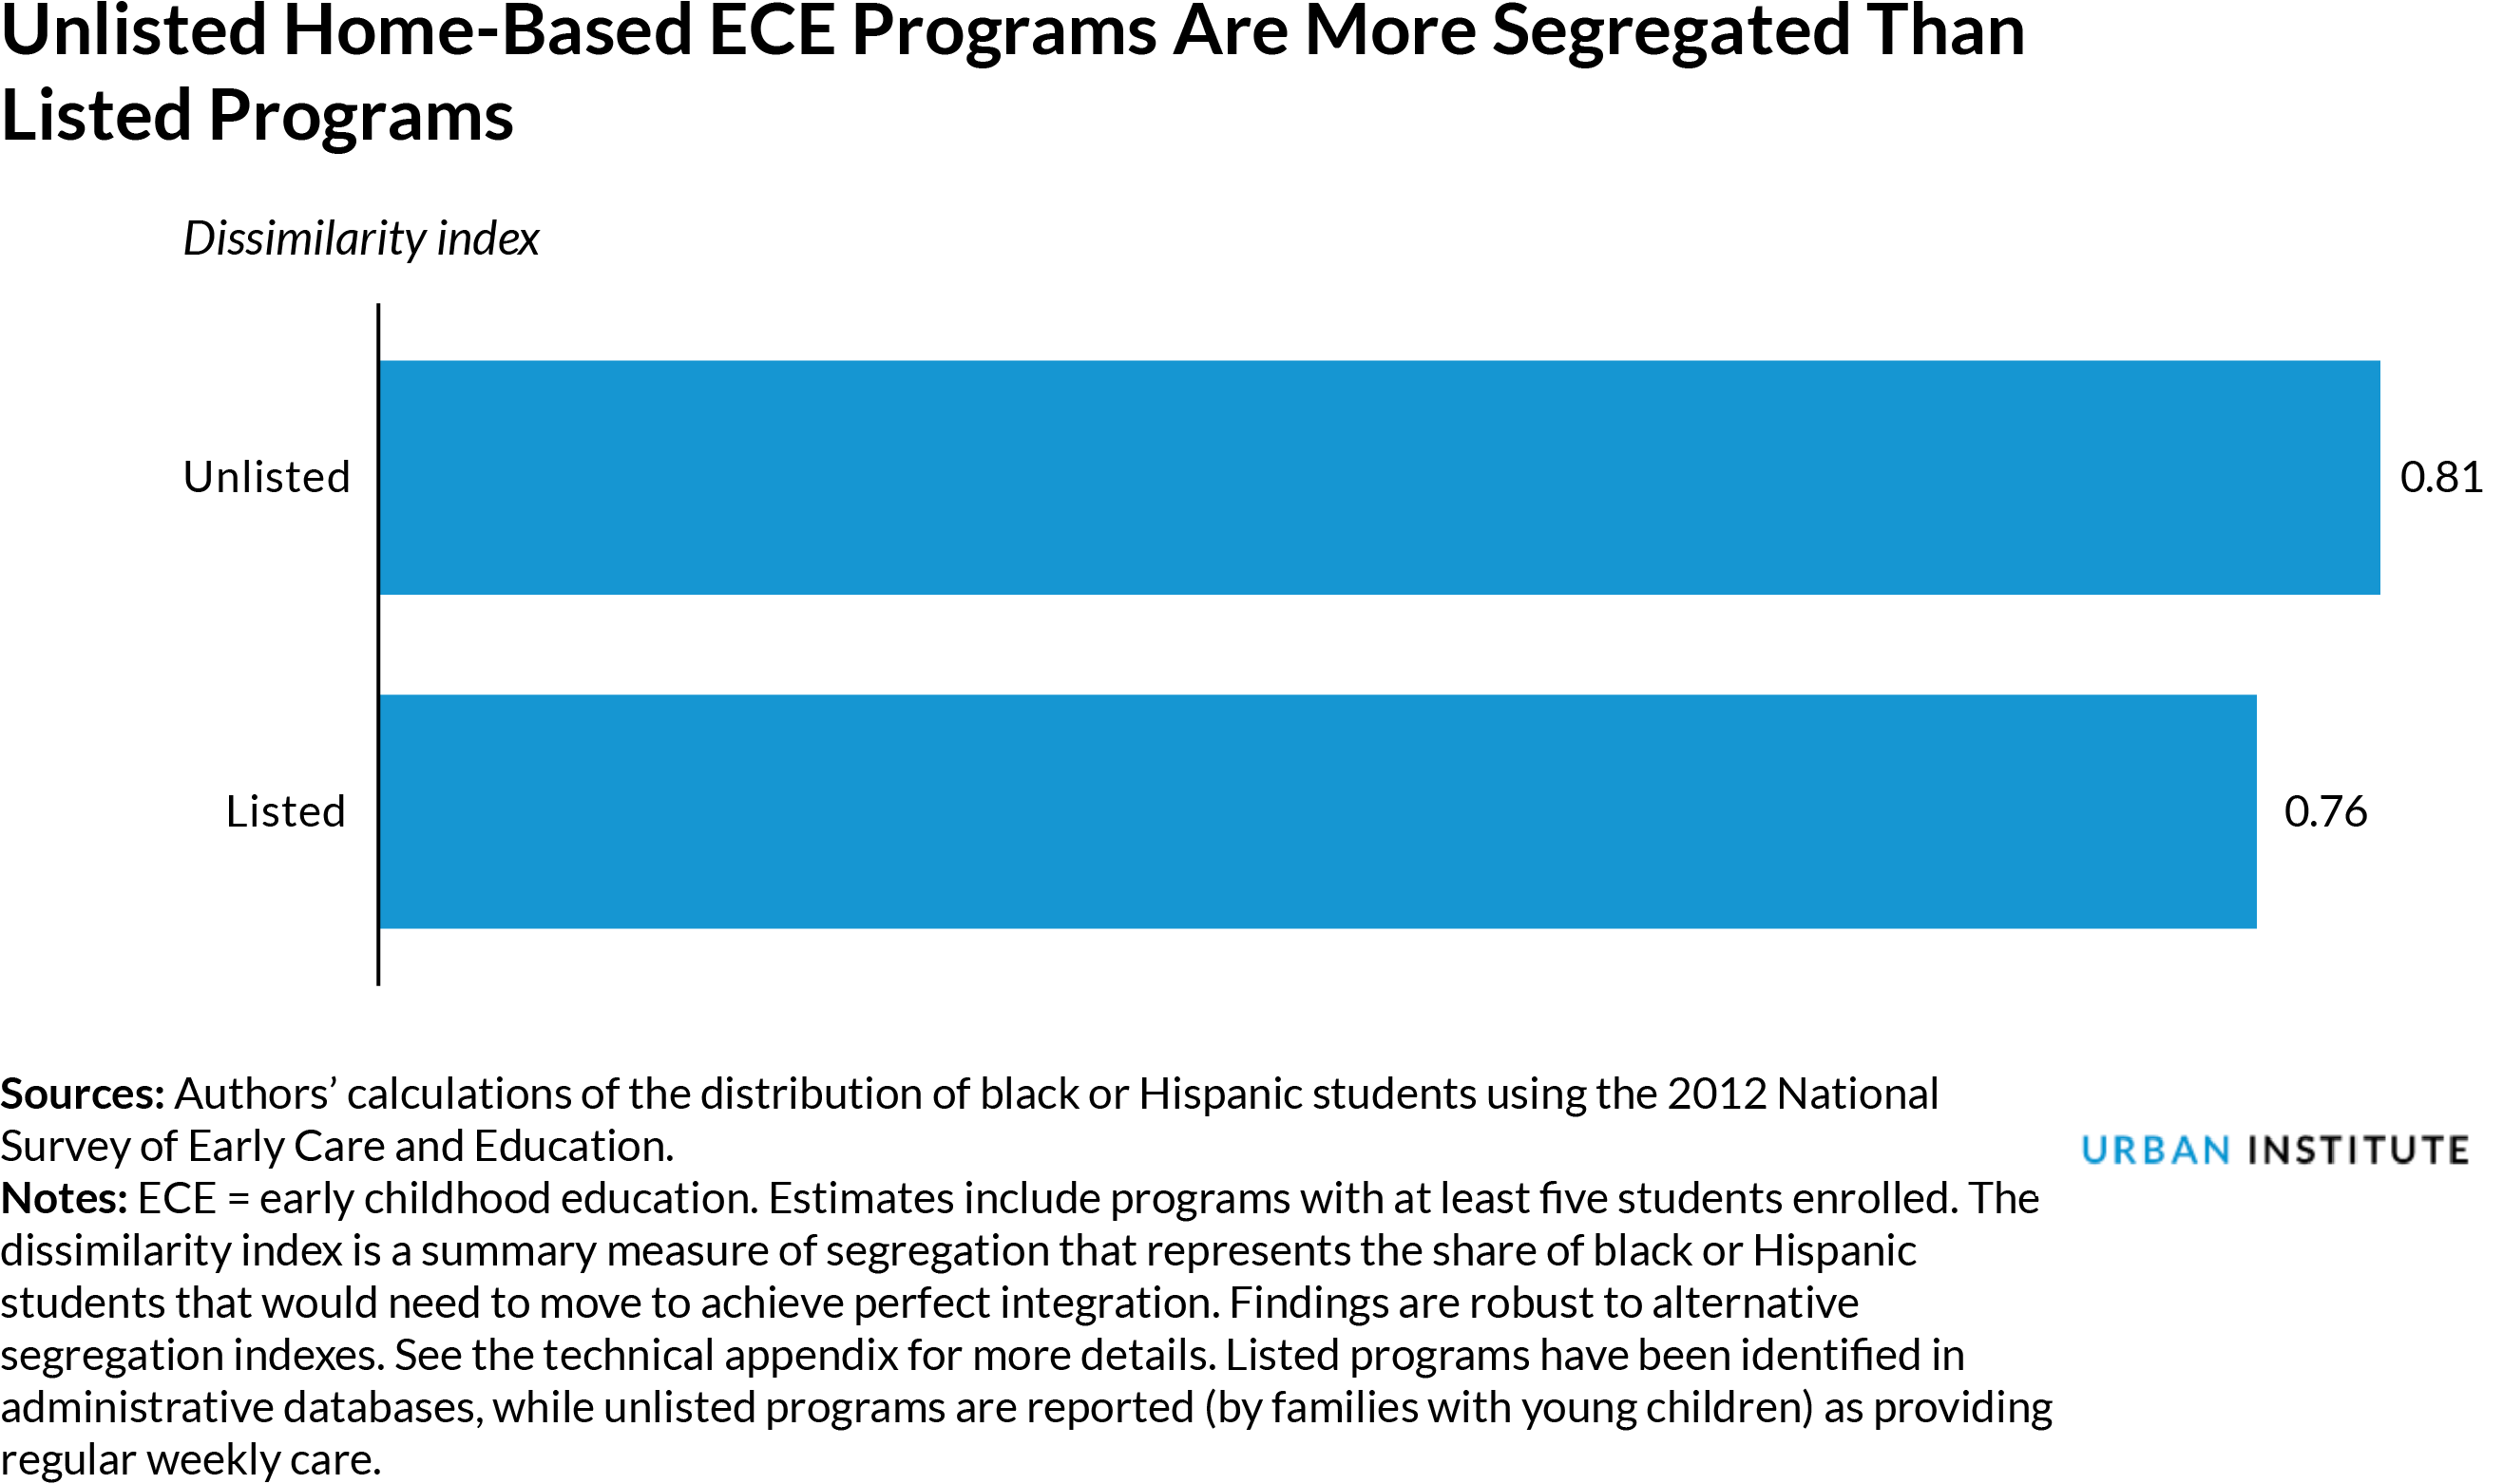 Unlisted Home-Based ECE Programs Are More Segregated Than Listed Programs